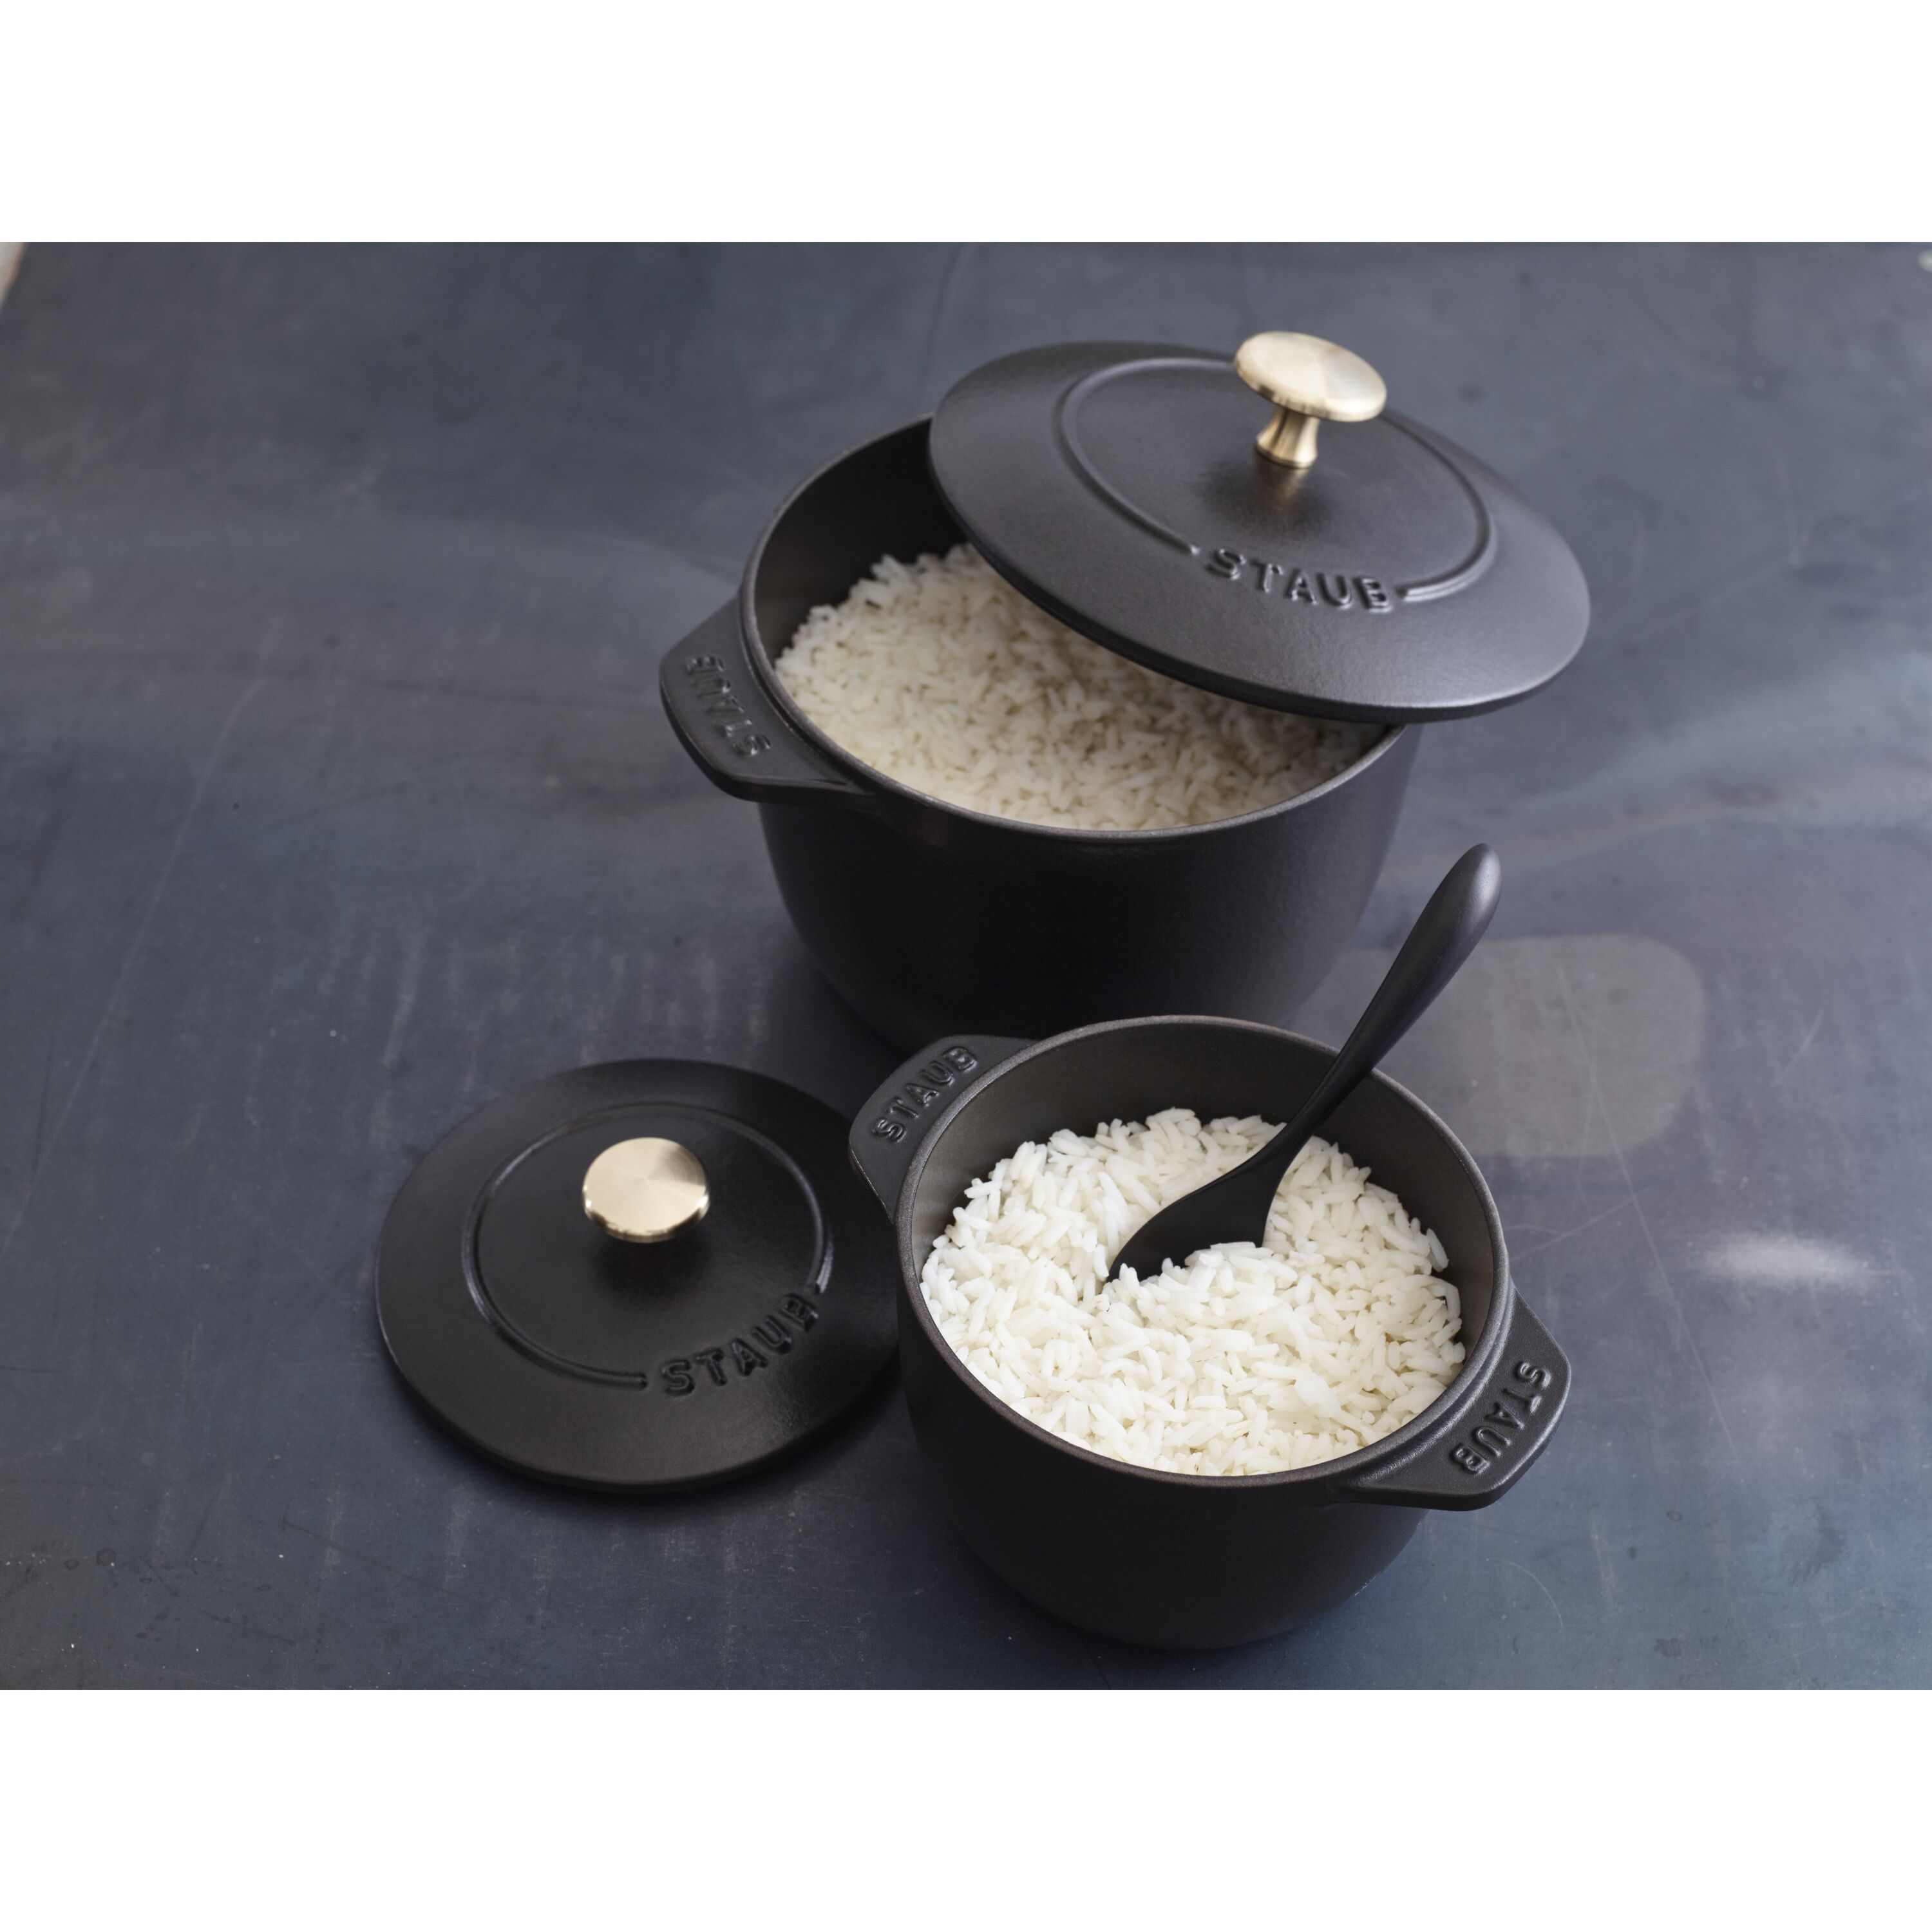 Food52 x Staub 2-in-1 Grill Pan & Cocotte by Food52 - Dwell